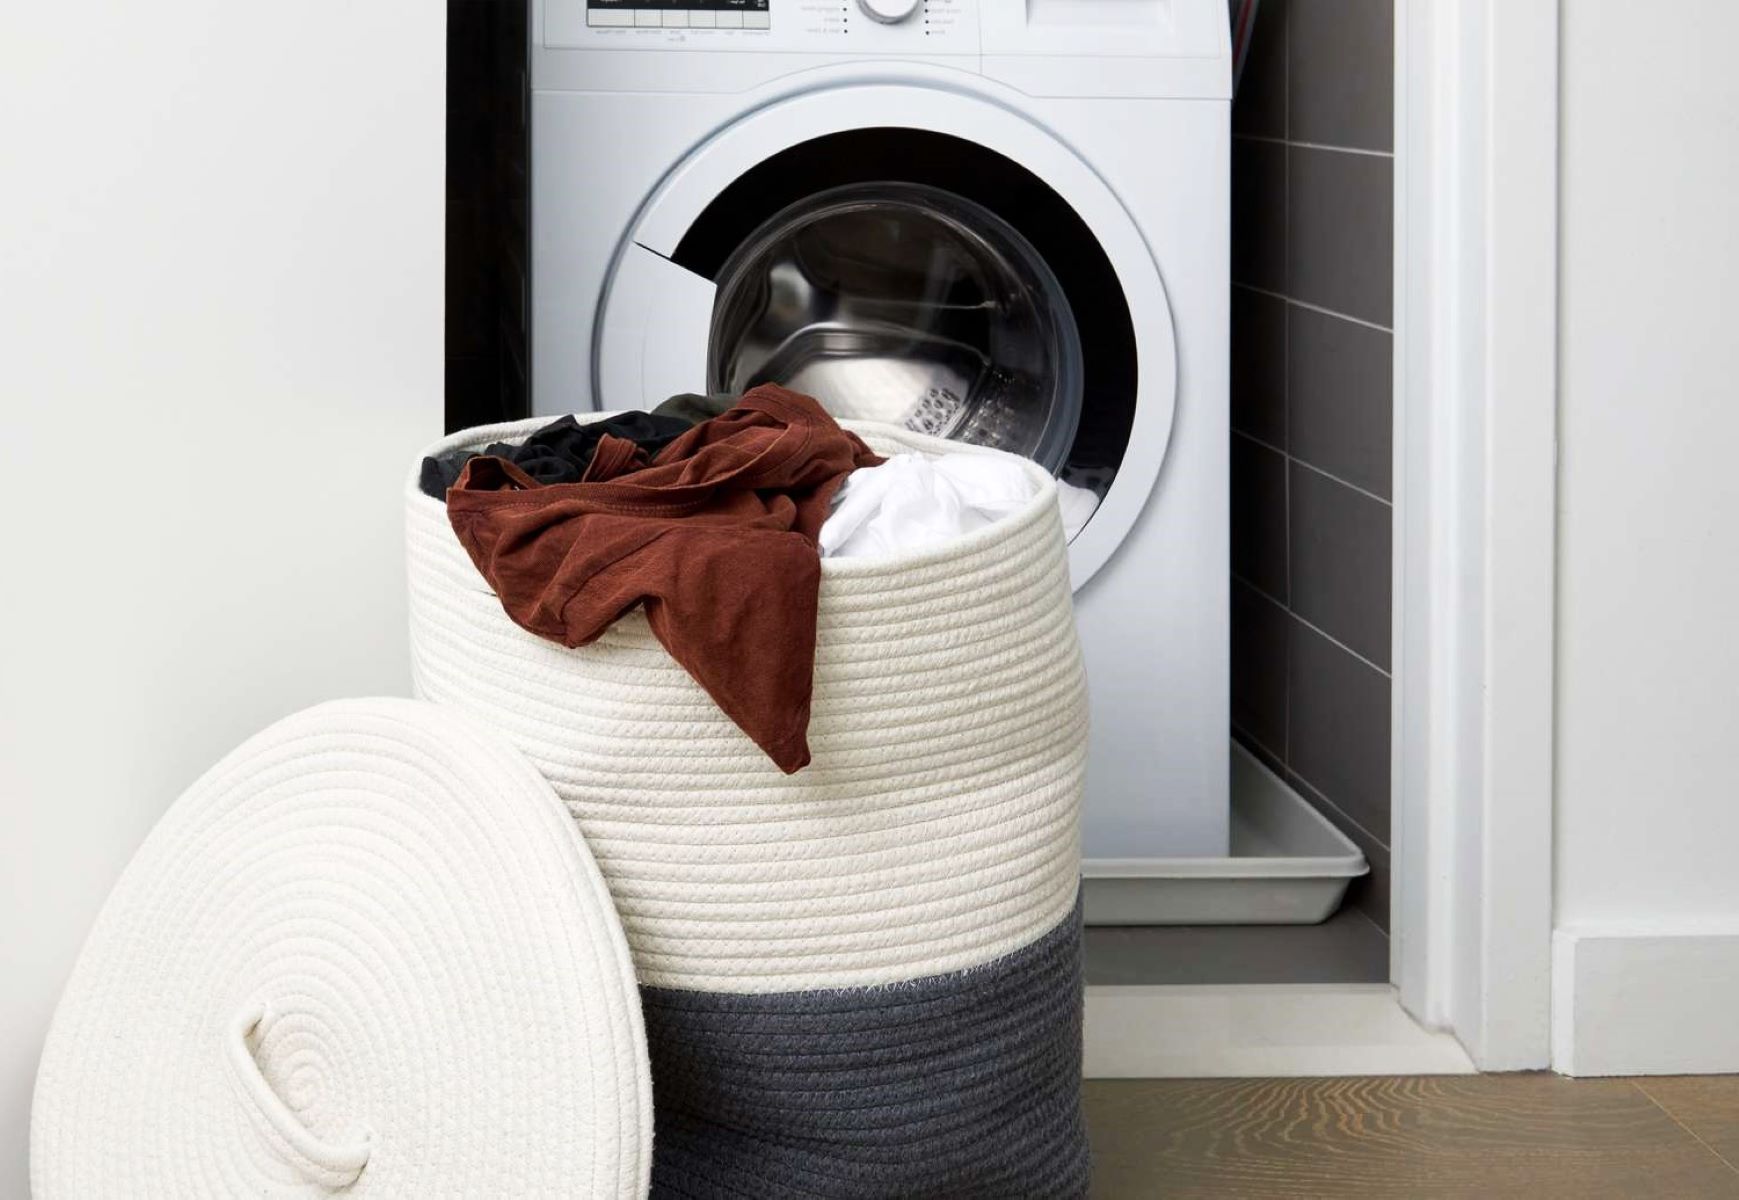 How To Get Fiberglass Out Of A Washing Machine